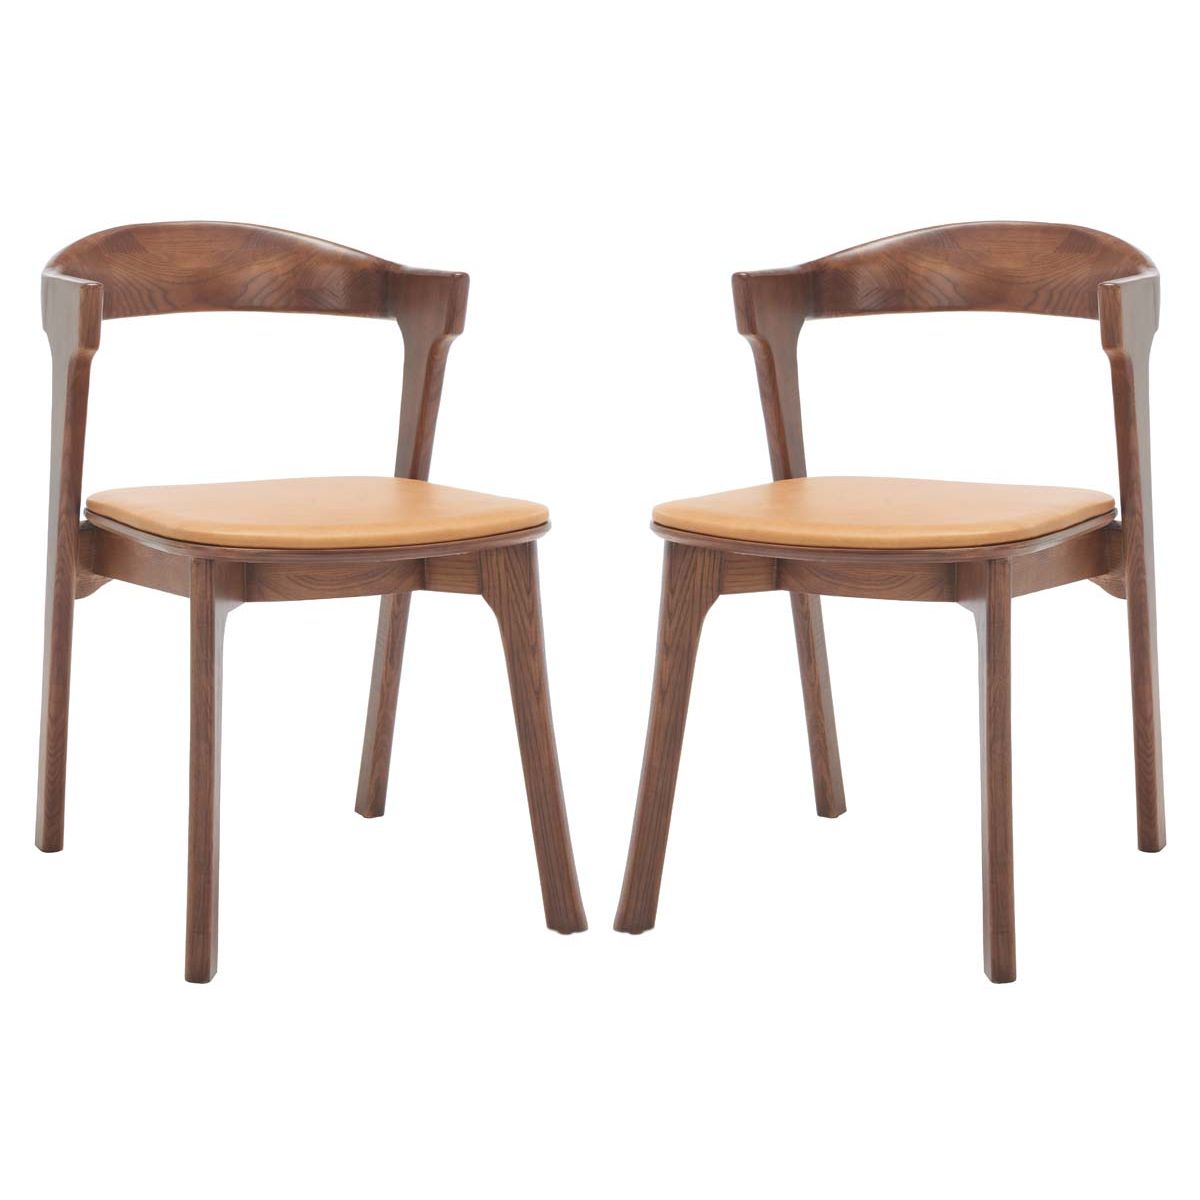 Safavieh Couture Brylie Wood And Leather Dining Chair(Set of 2) , SFV4126 - Walnut / Brown